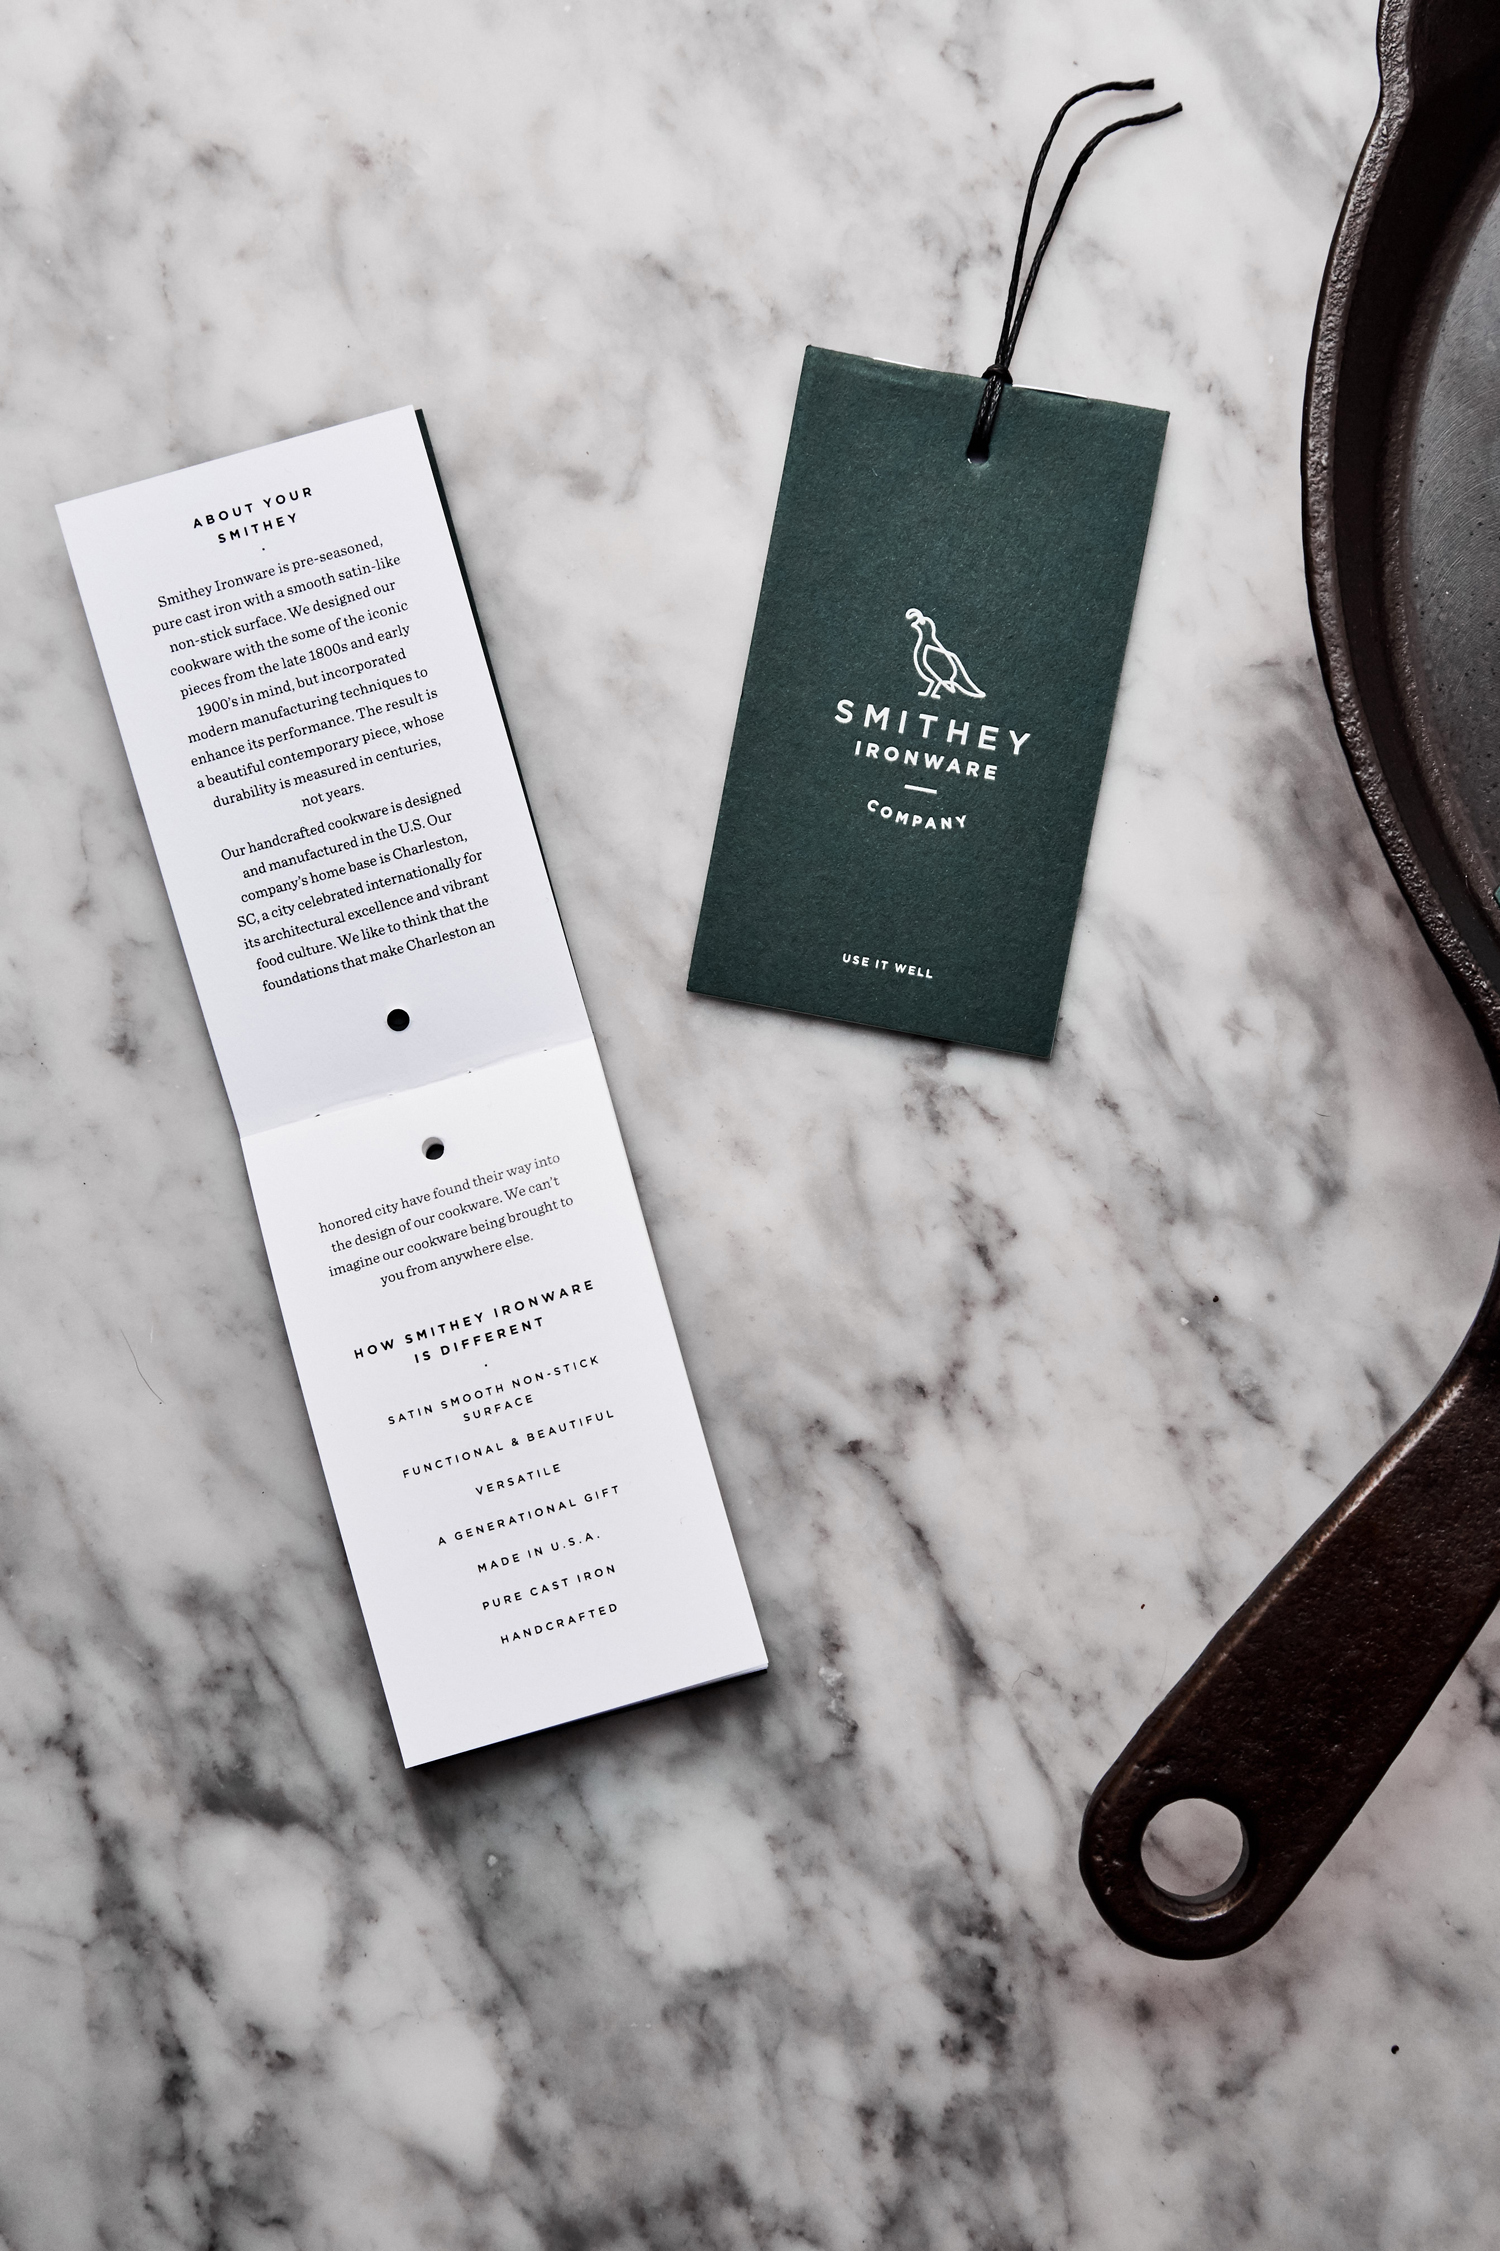 Brand identity and tags with green paper and white ink detail for Smithey Ironware Company by Charleston based Stitch, United States